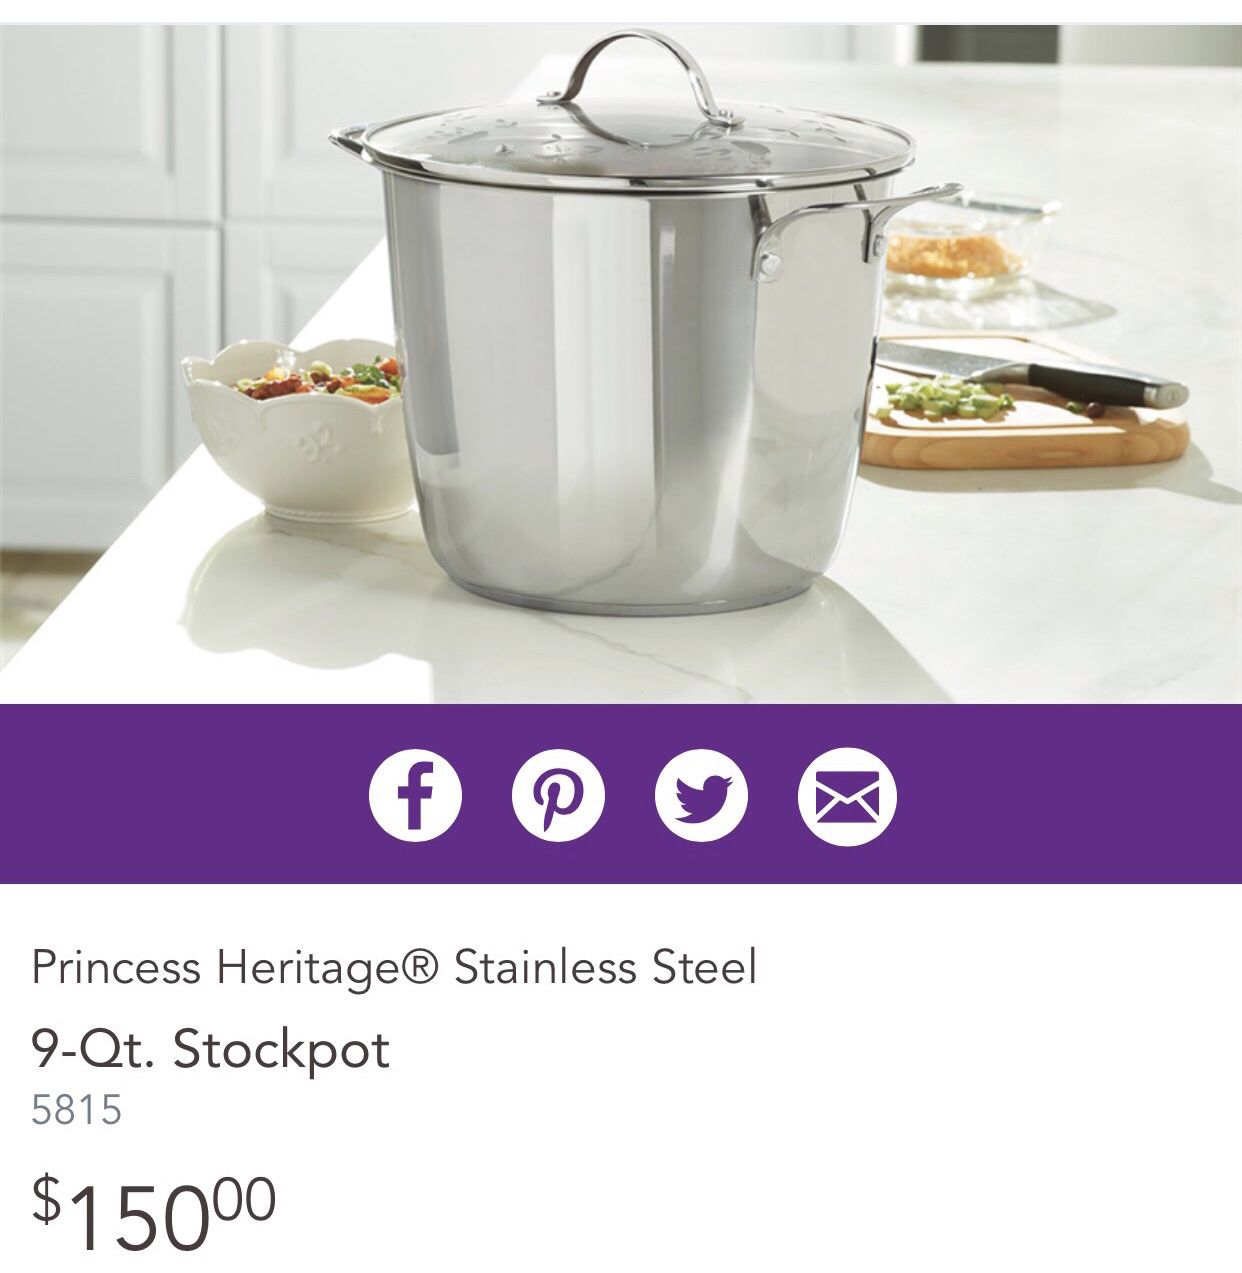 Princess House Heritage Stainless Steel 9-Qt. Stockpot (5815 ) New In Box